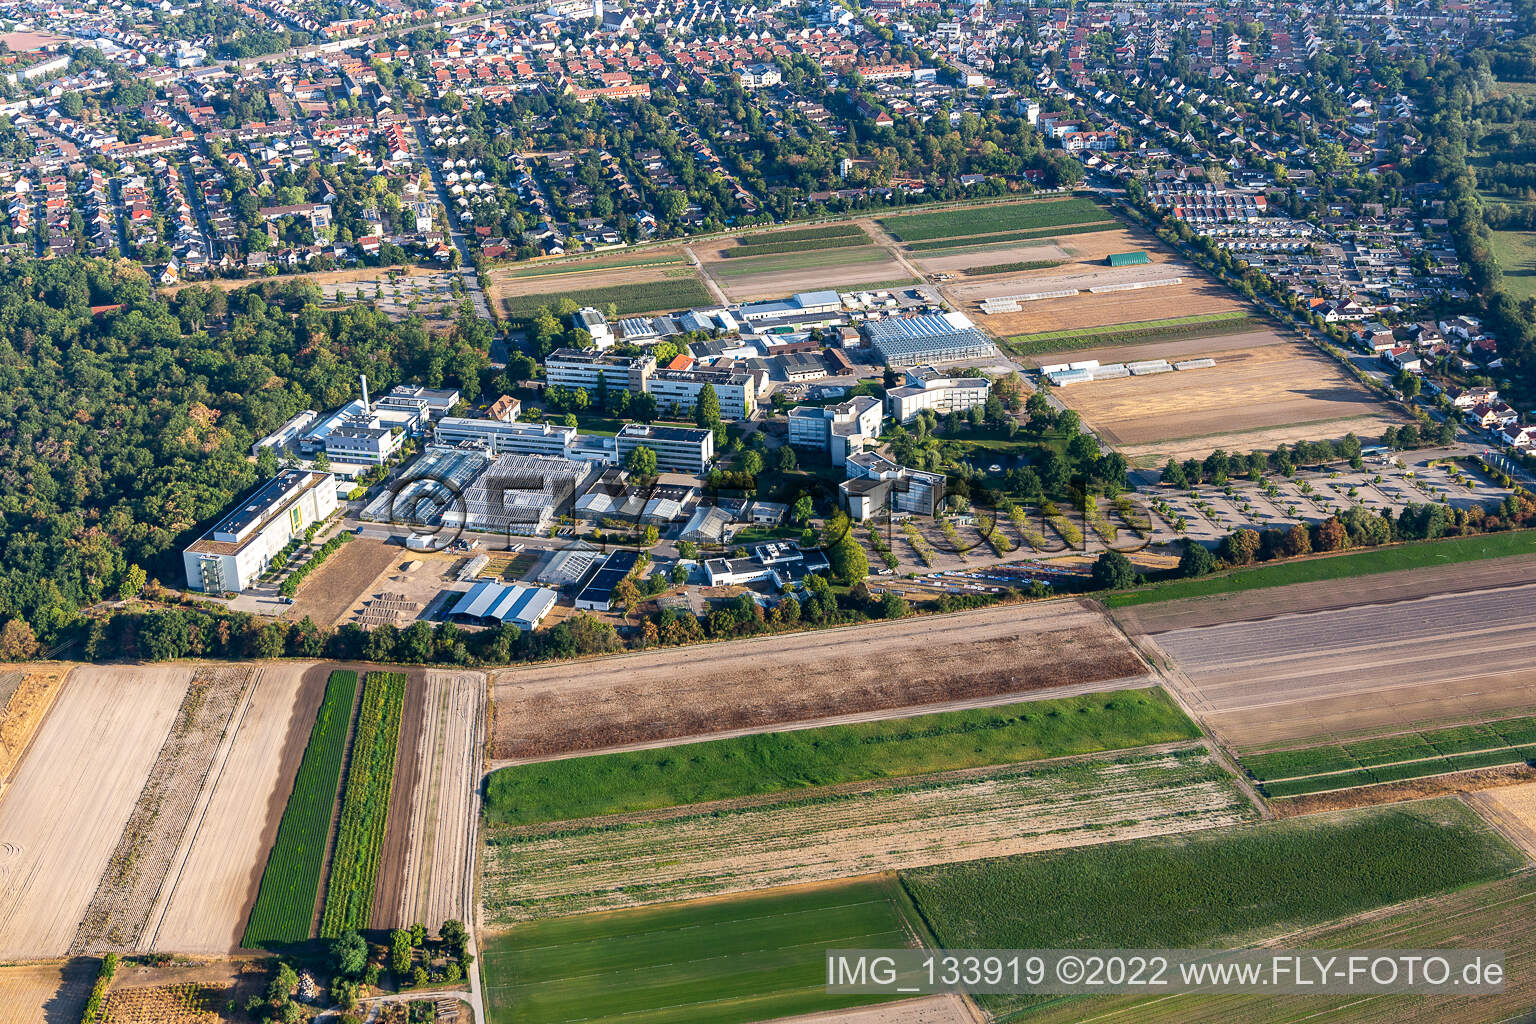 Aerial photograpy of BASF Agricultural Center in Limburgerhof in the state Rhineland-Palatinate, Germany